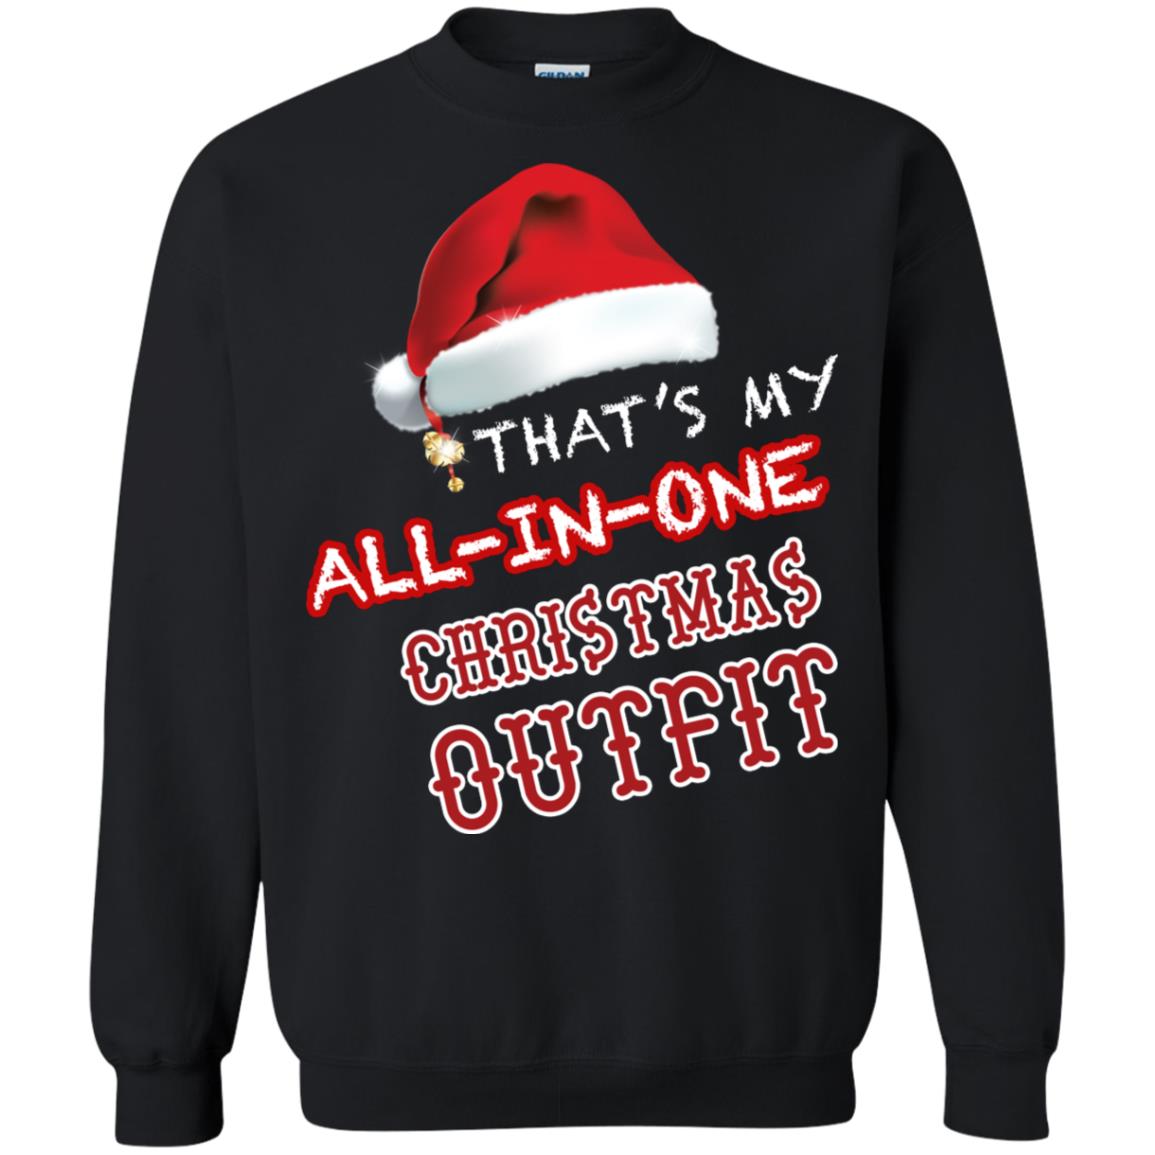 That's My All In One Christmas Outfit X-mas Gift Shirt For Mens Or WomensG180 Gildan Crewneck Pullover Sweatshirt 8 oz.